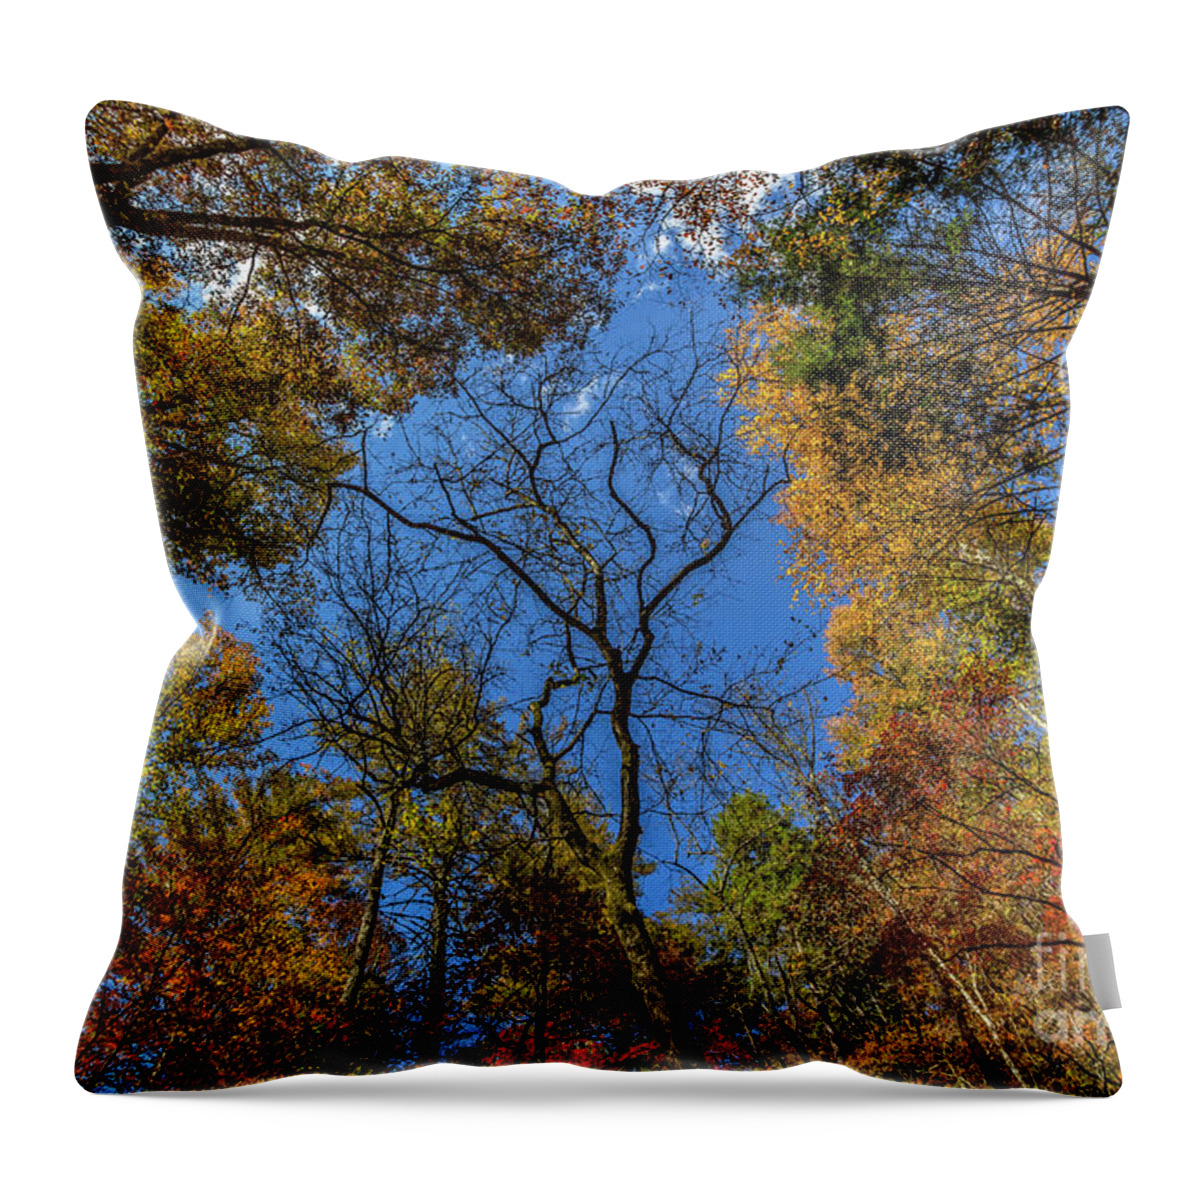 Smithgall-woods Throw Pillow featuring the photograph Dreaming in Smithgall Woods #2 by Bernd Laeschke